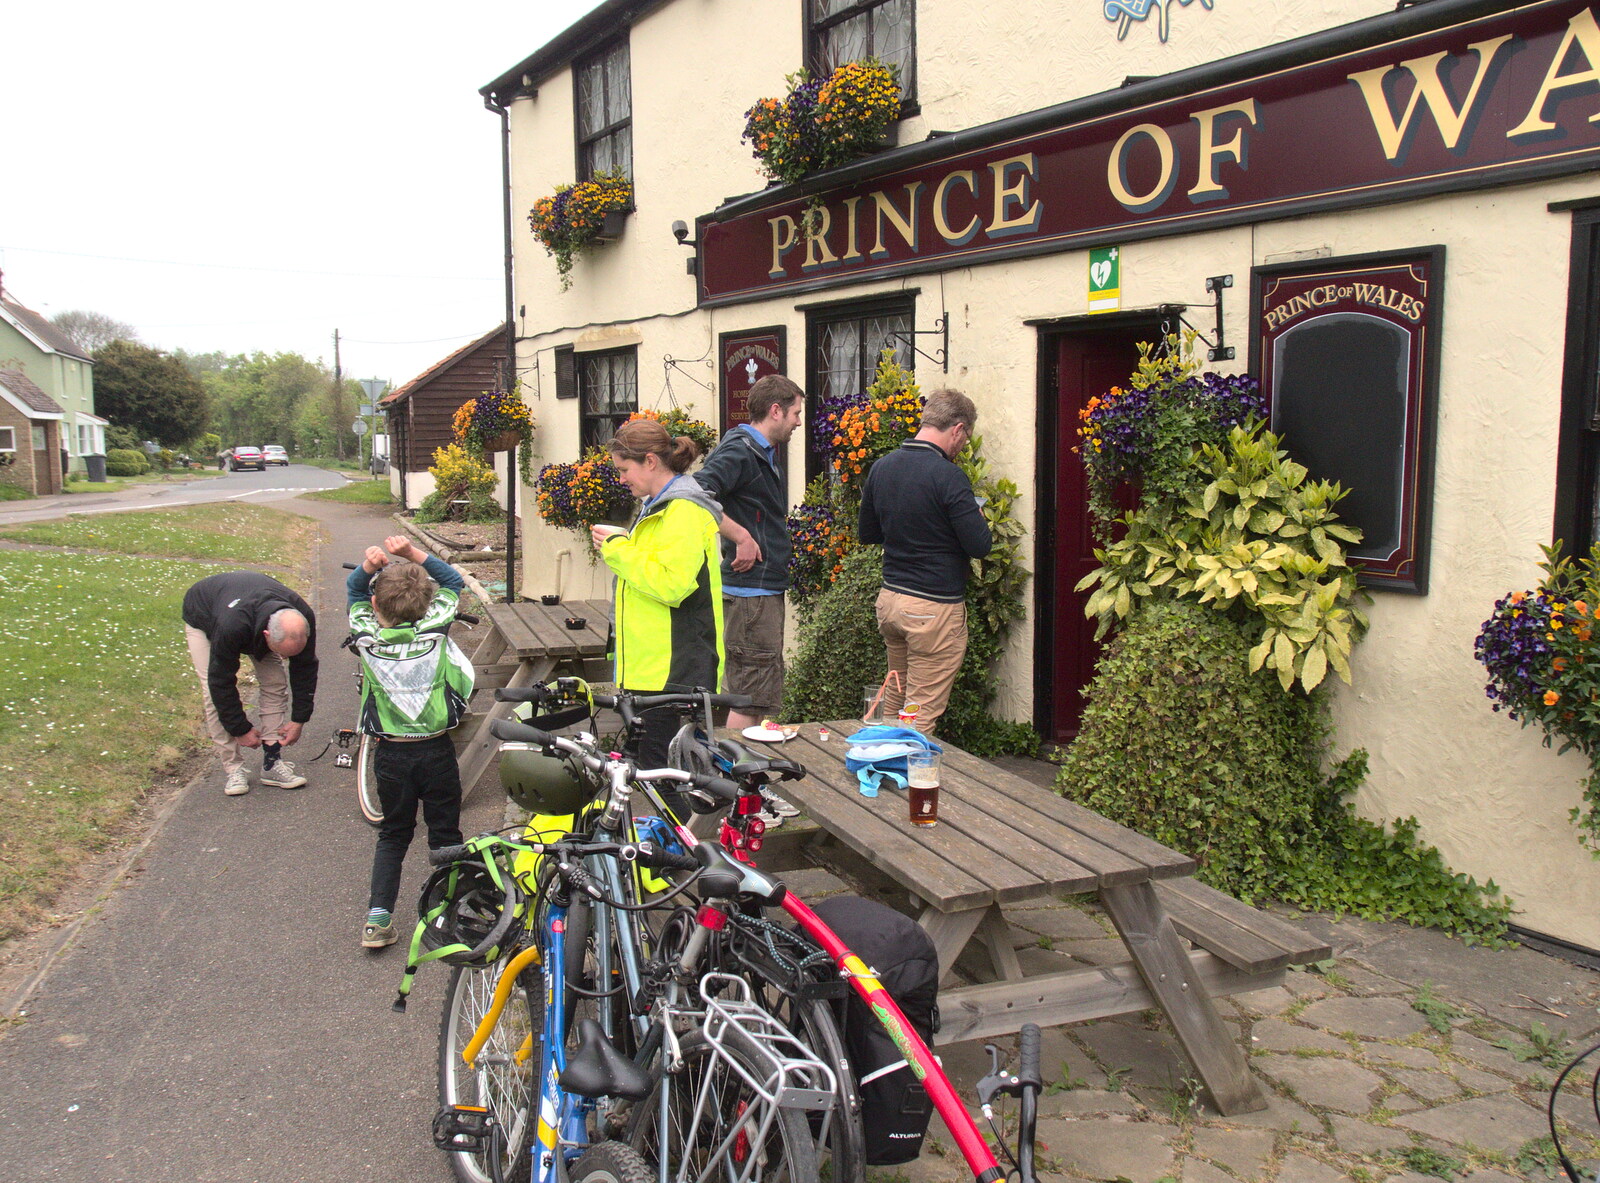 More bikes outside the Prince of Wales from The Last-Ever BSCC Weekend Away Bike Ride, Thaxted, Essex - 6th May 2017